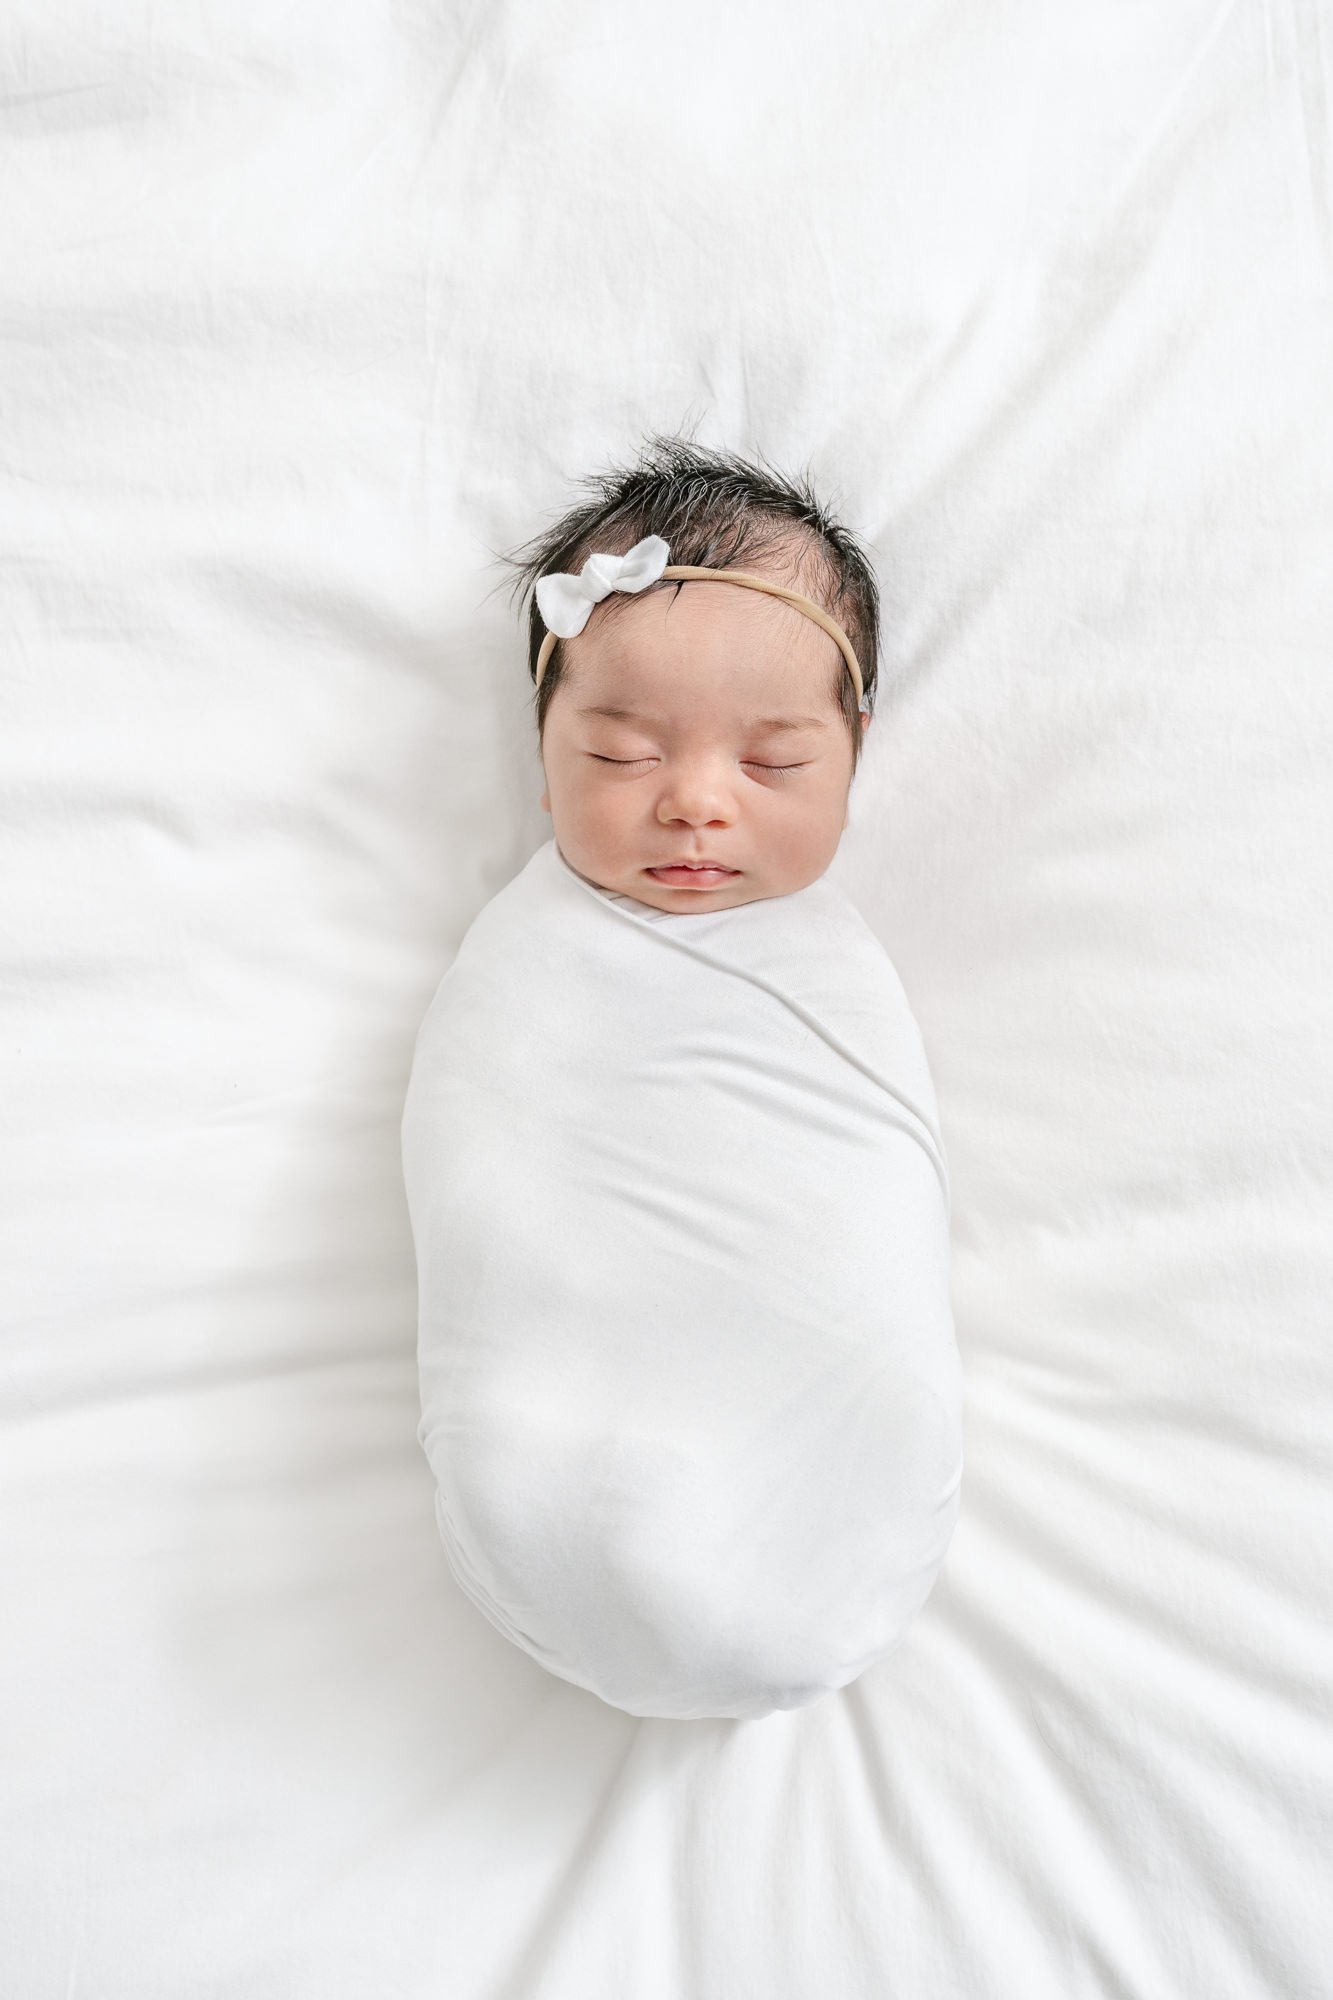  A beautiful newborn baby girl lays on the bed wrapped up tightly in a white gauze blanket on a cozy white comforter. #newyorkcityphotographer #familyportraits #newbornportraitsession #inhomephotography #familyoffive #familyposeinspo #newjerseyfamily